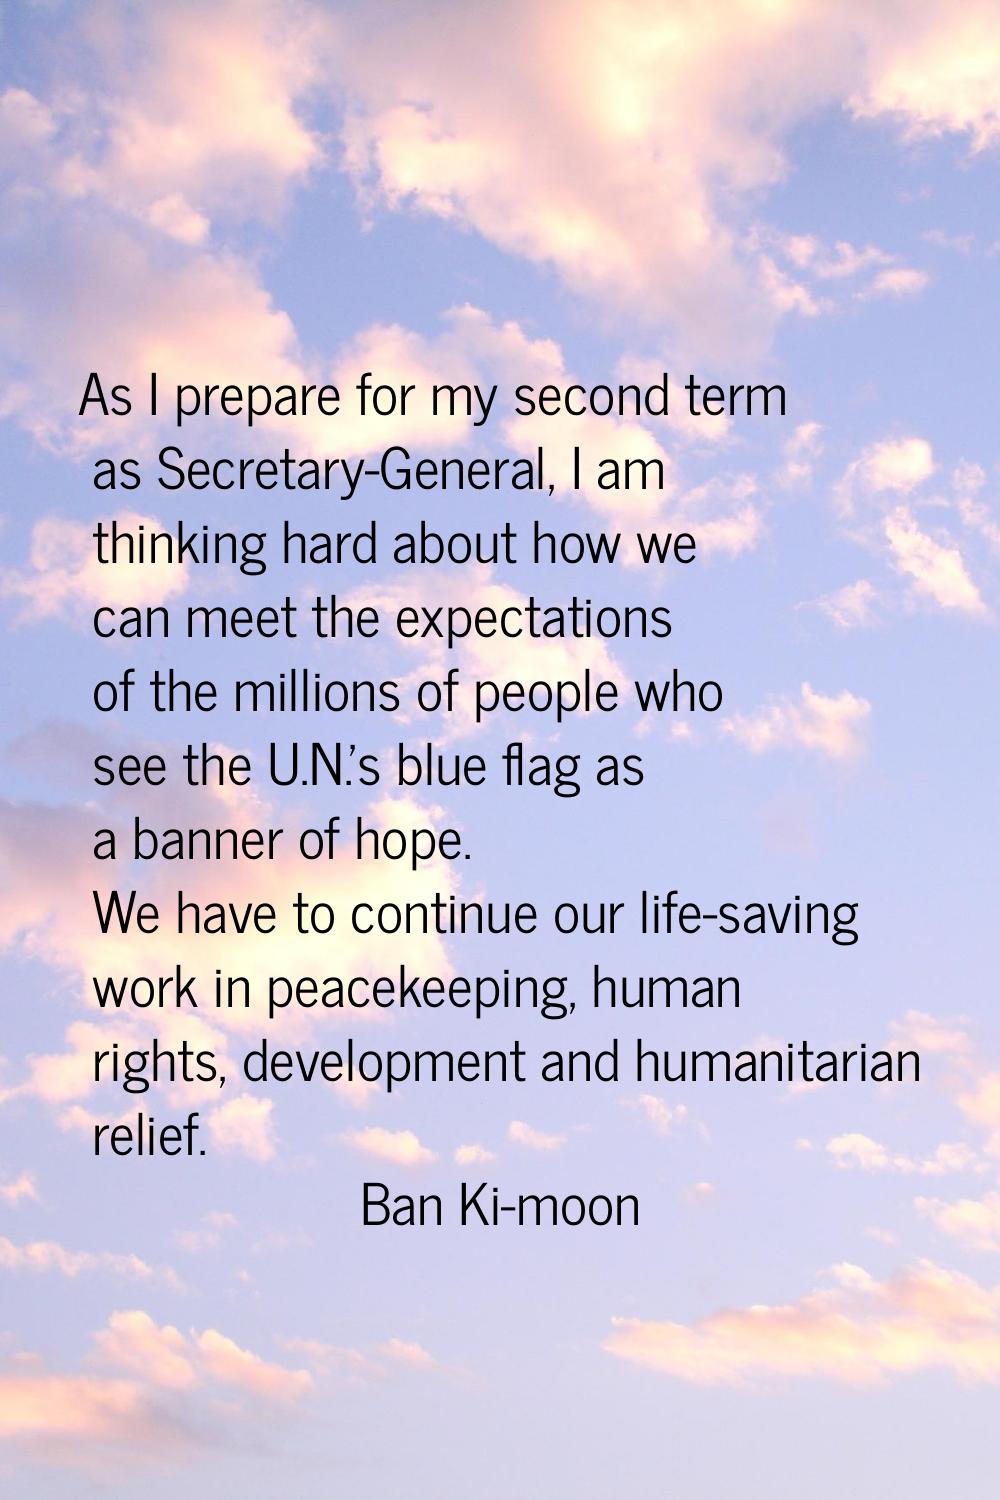 As I prepare for my second term as Secretary-General, I am thinking hard about how we can meet the 